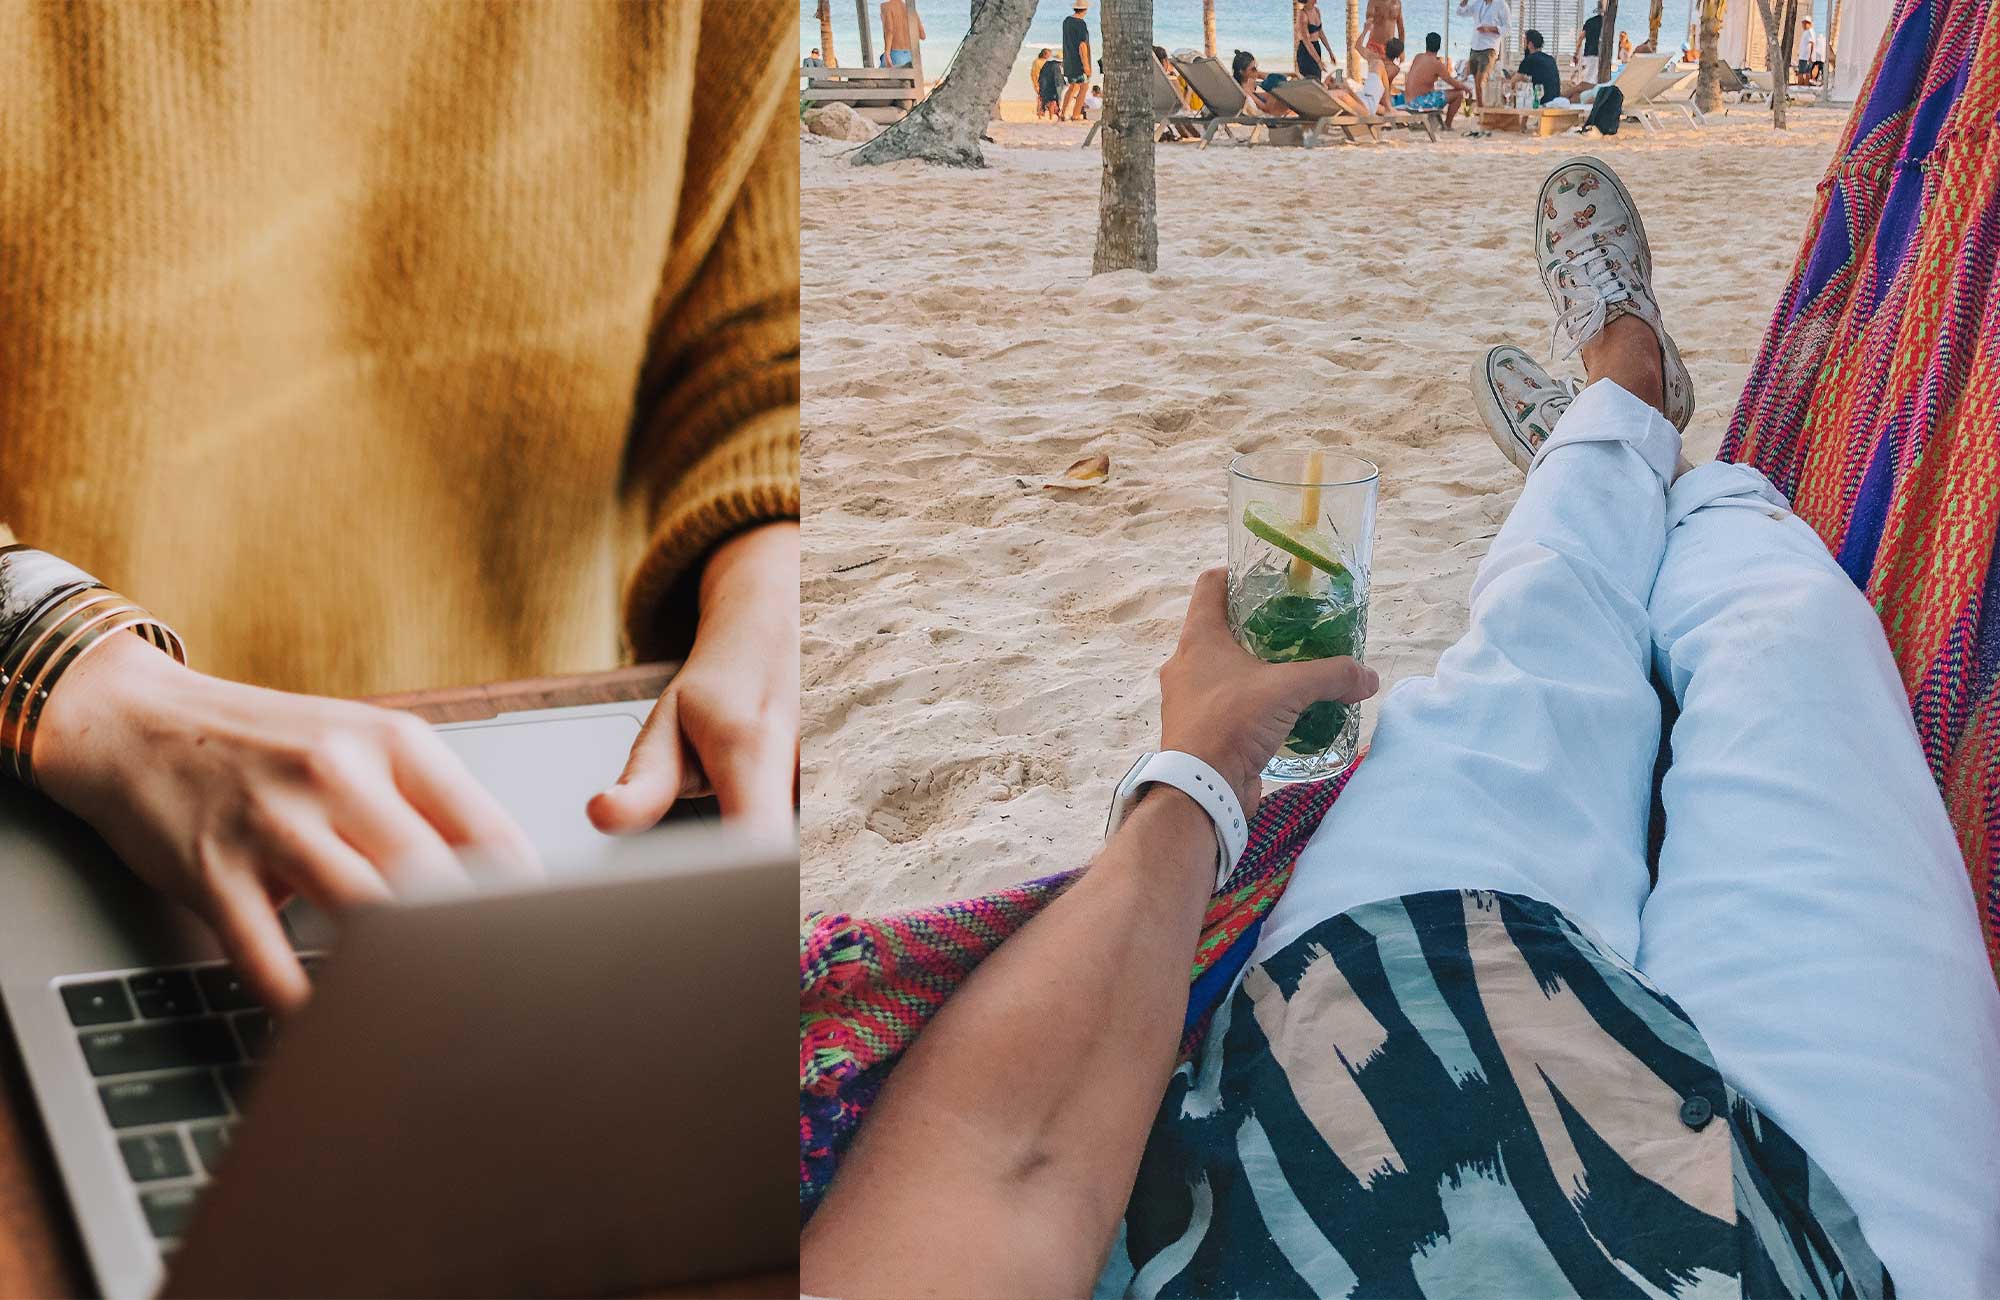 working at the office vs working at the beach